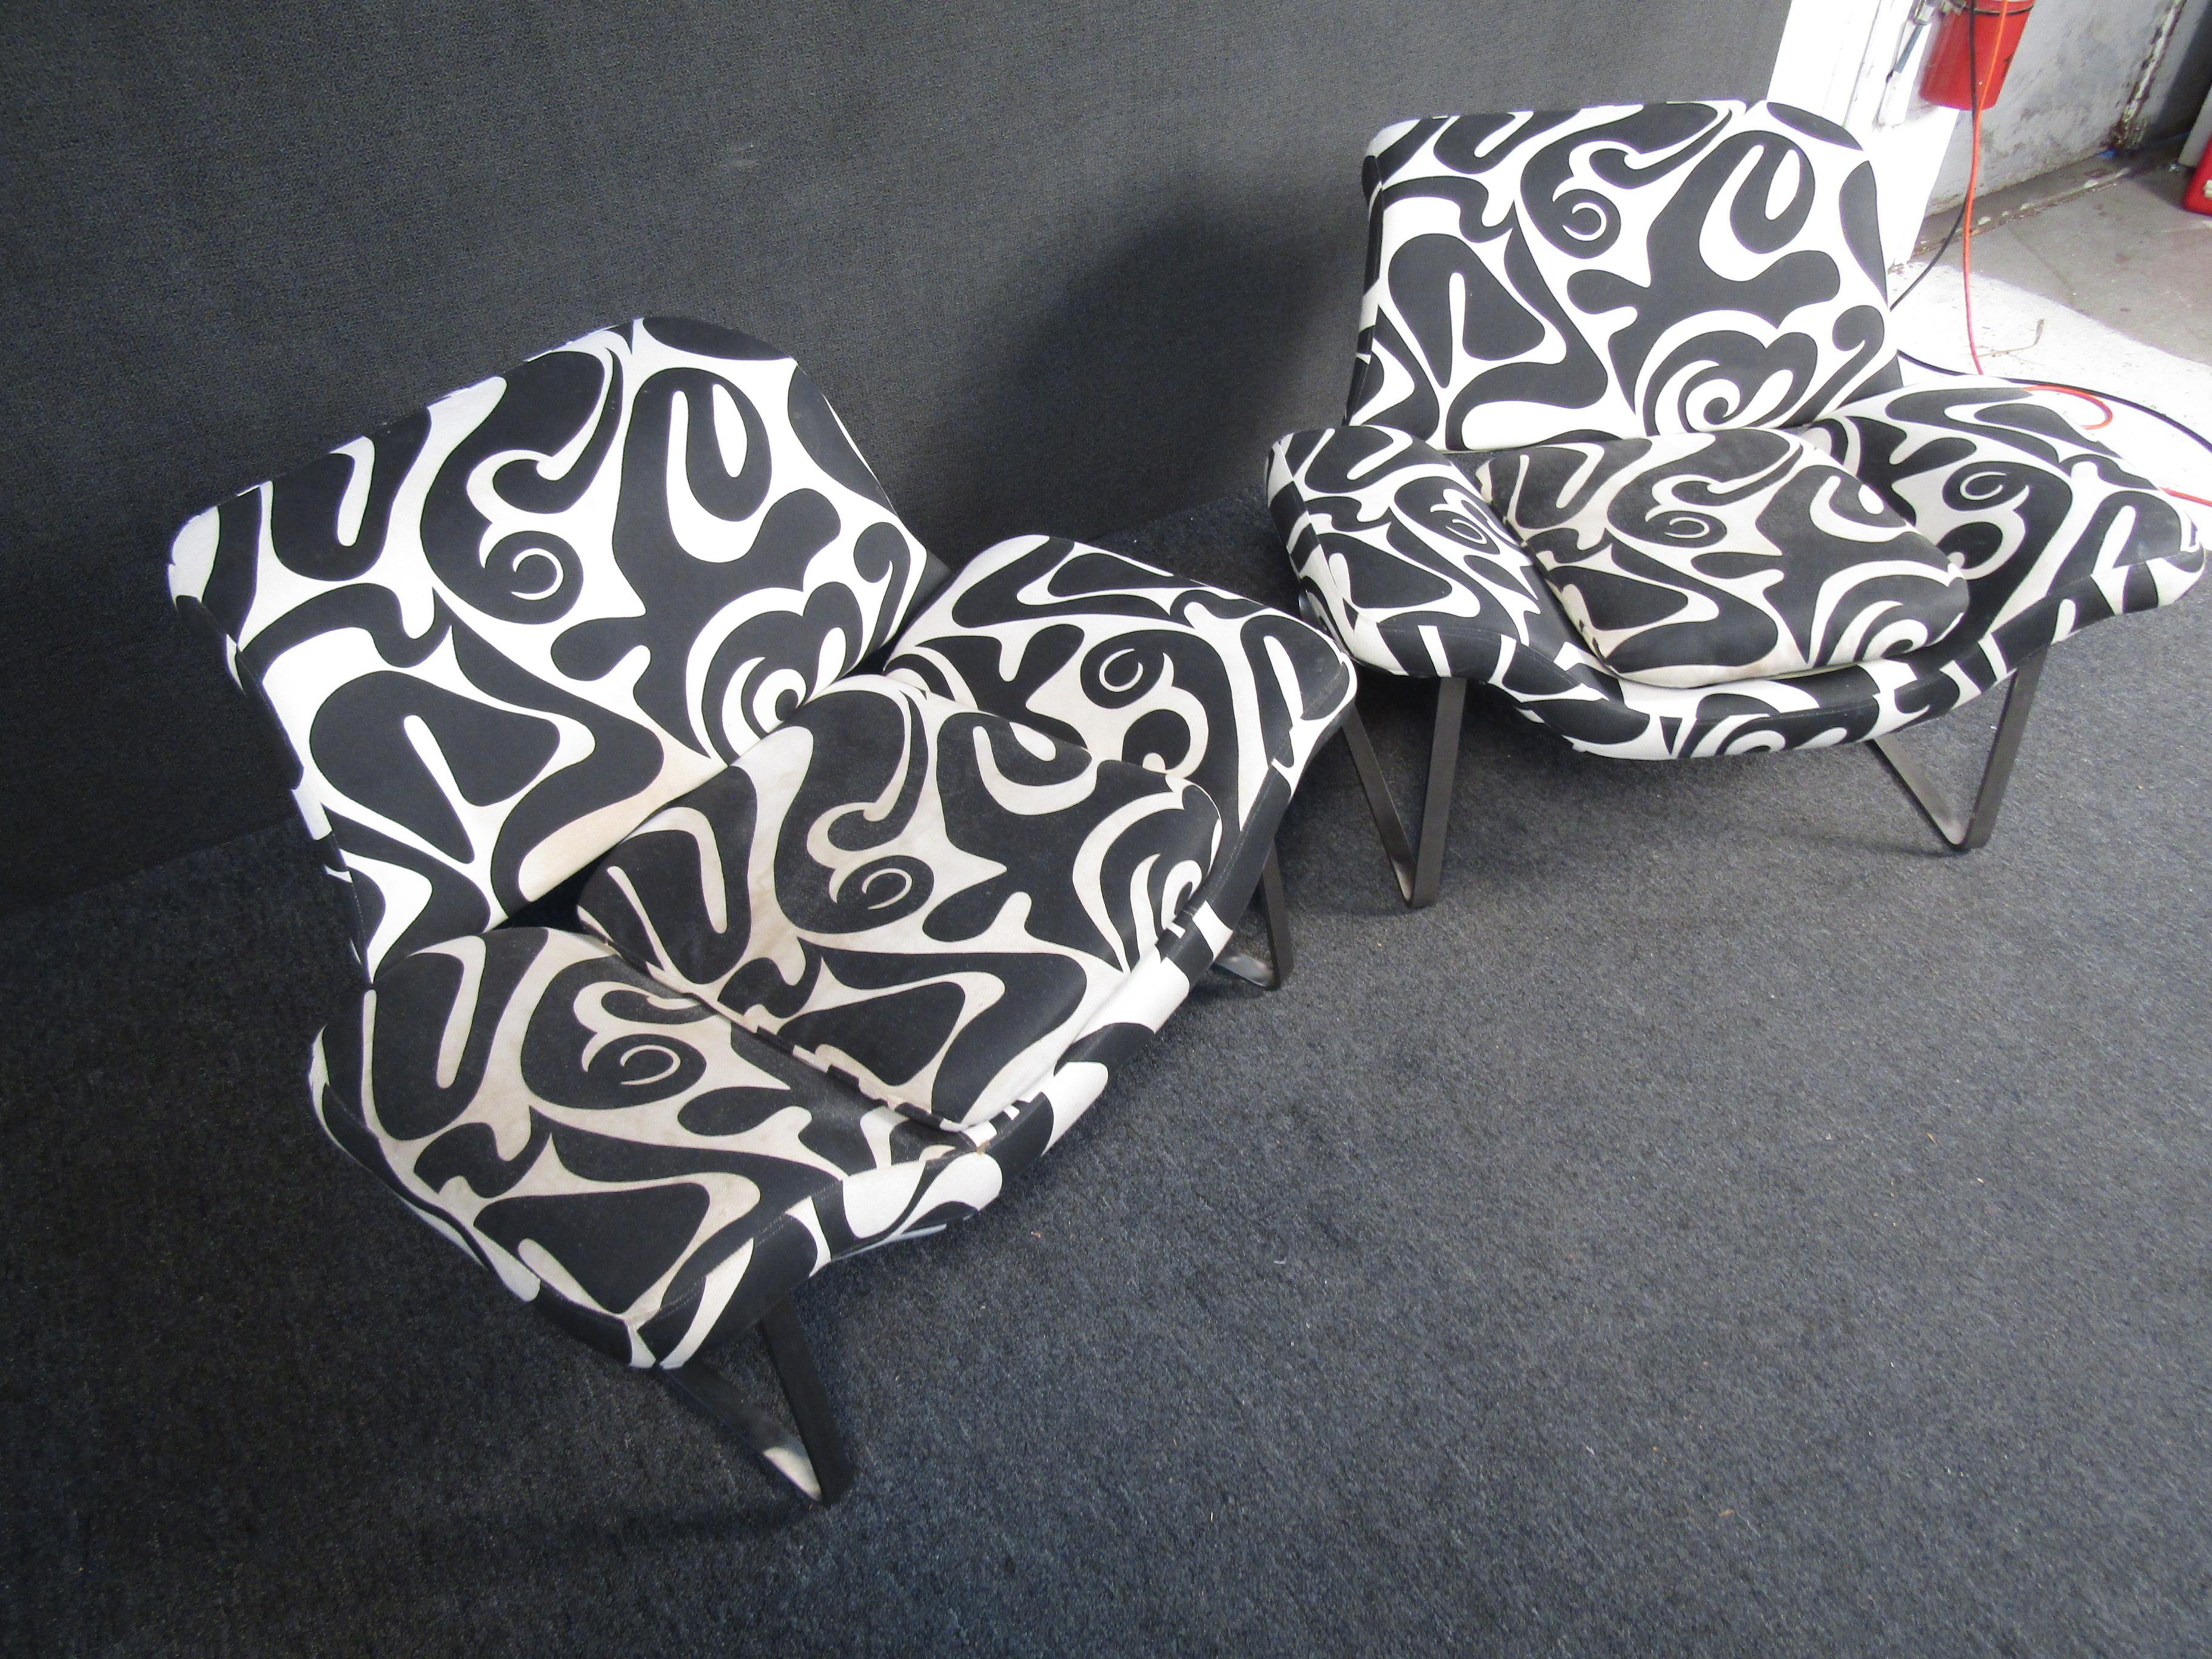 Pair of vintage modern lounge chairs. These chairs feature a unique black and white fabric design as well as sturdy metal legs. The tulip style appearance would add pop to any living room or studio space.

Please confirm item location (NY or NJ).